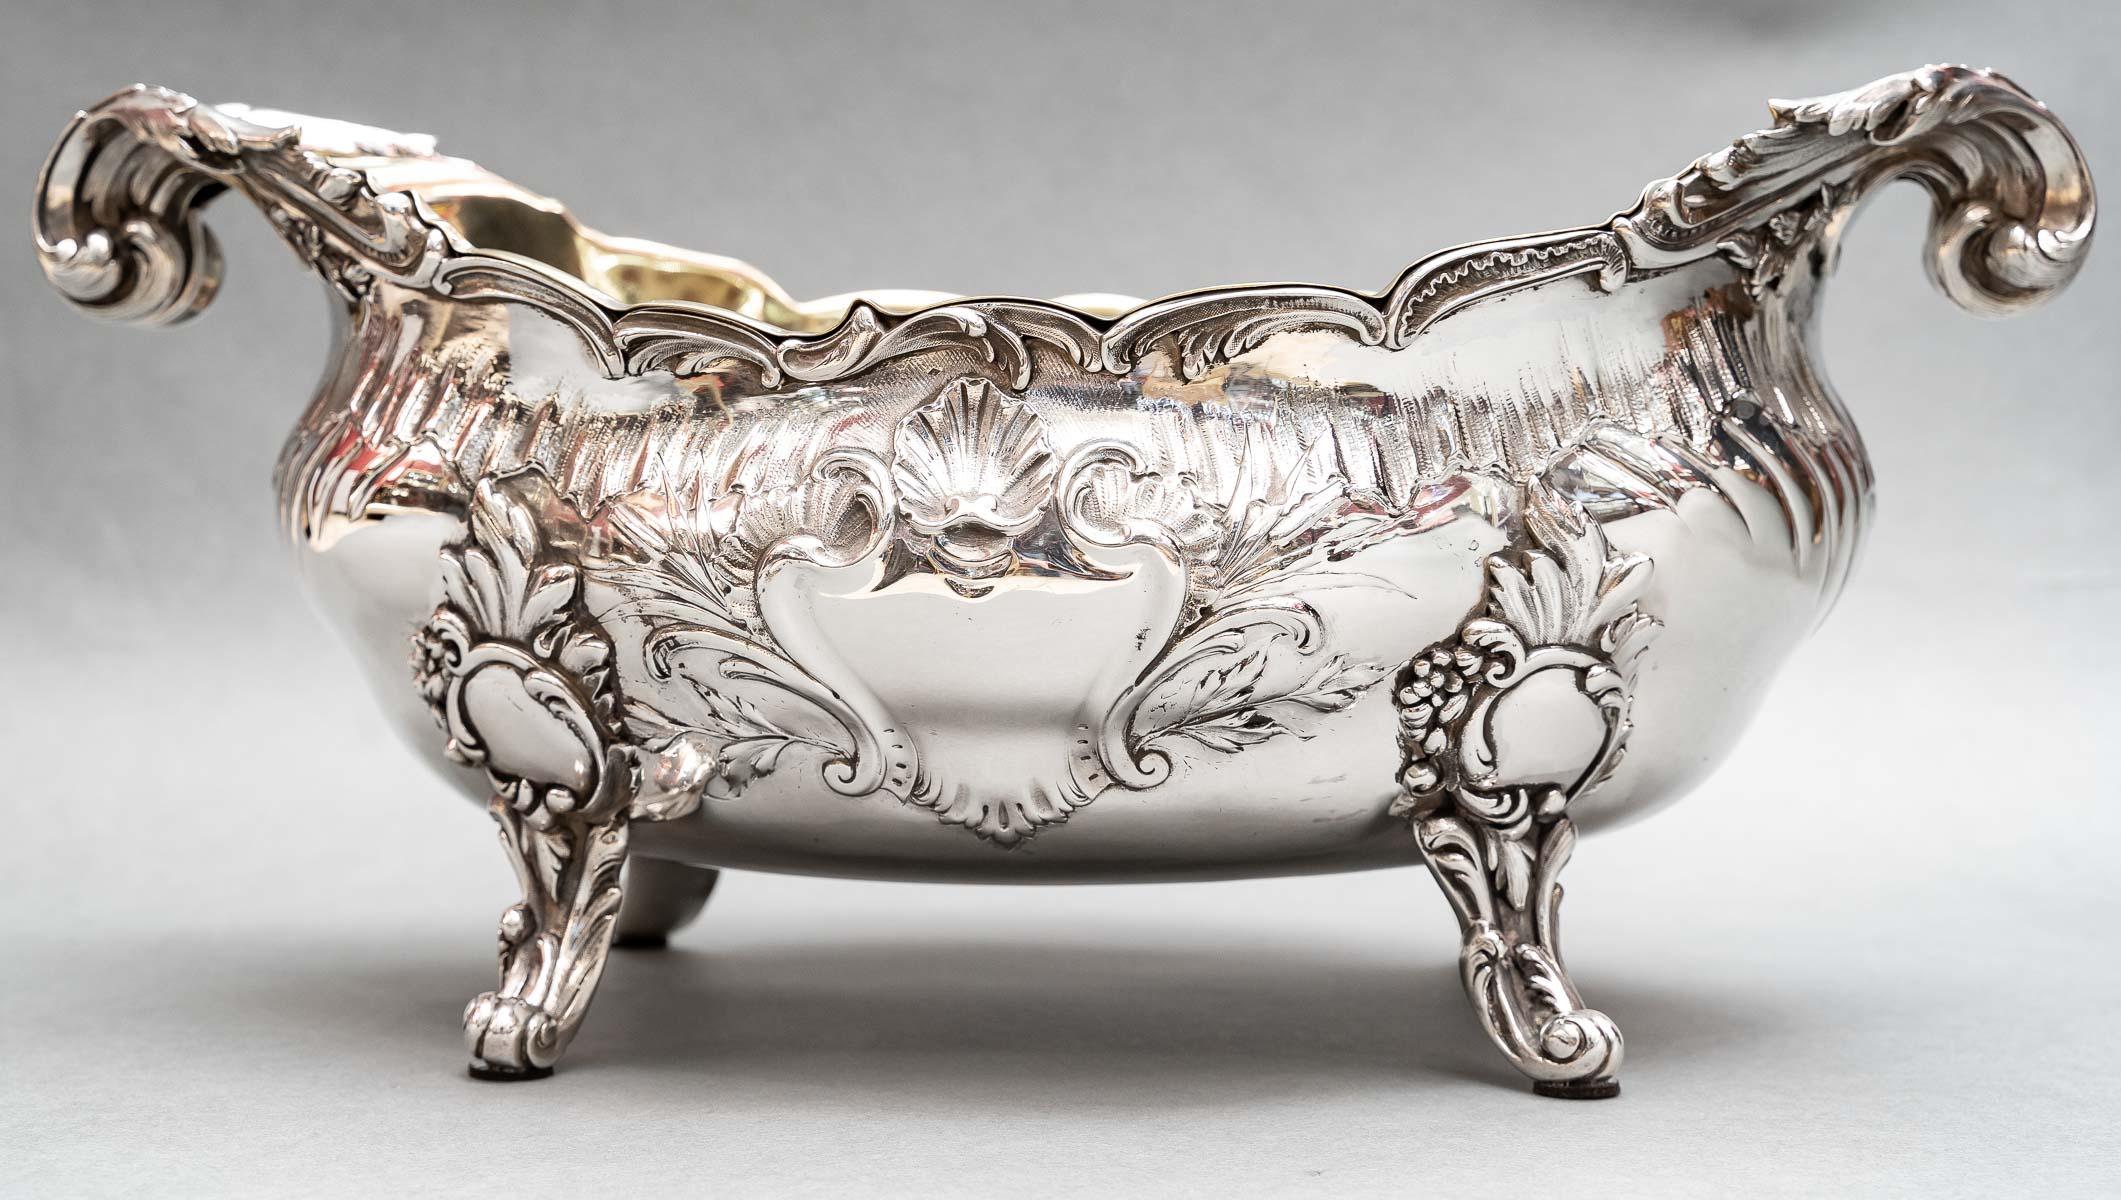 Oblong silver planter, resting on four claw feet in foliate crosier. The body is decorated with repoussé with a frieze of grooves. On the long sides is a rocaille cartouche surmounted by a shell. The integral handles are rolled up. The removable